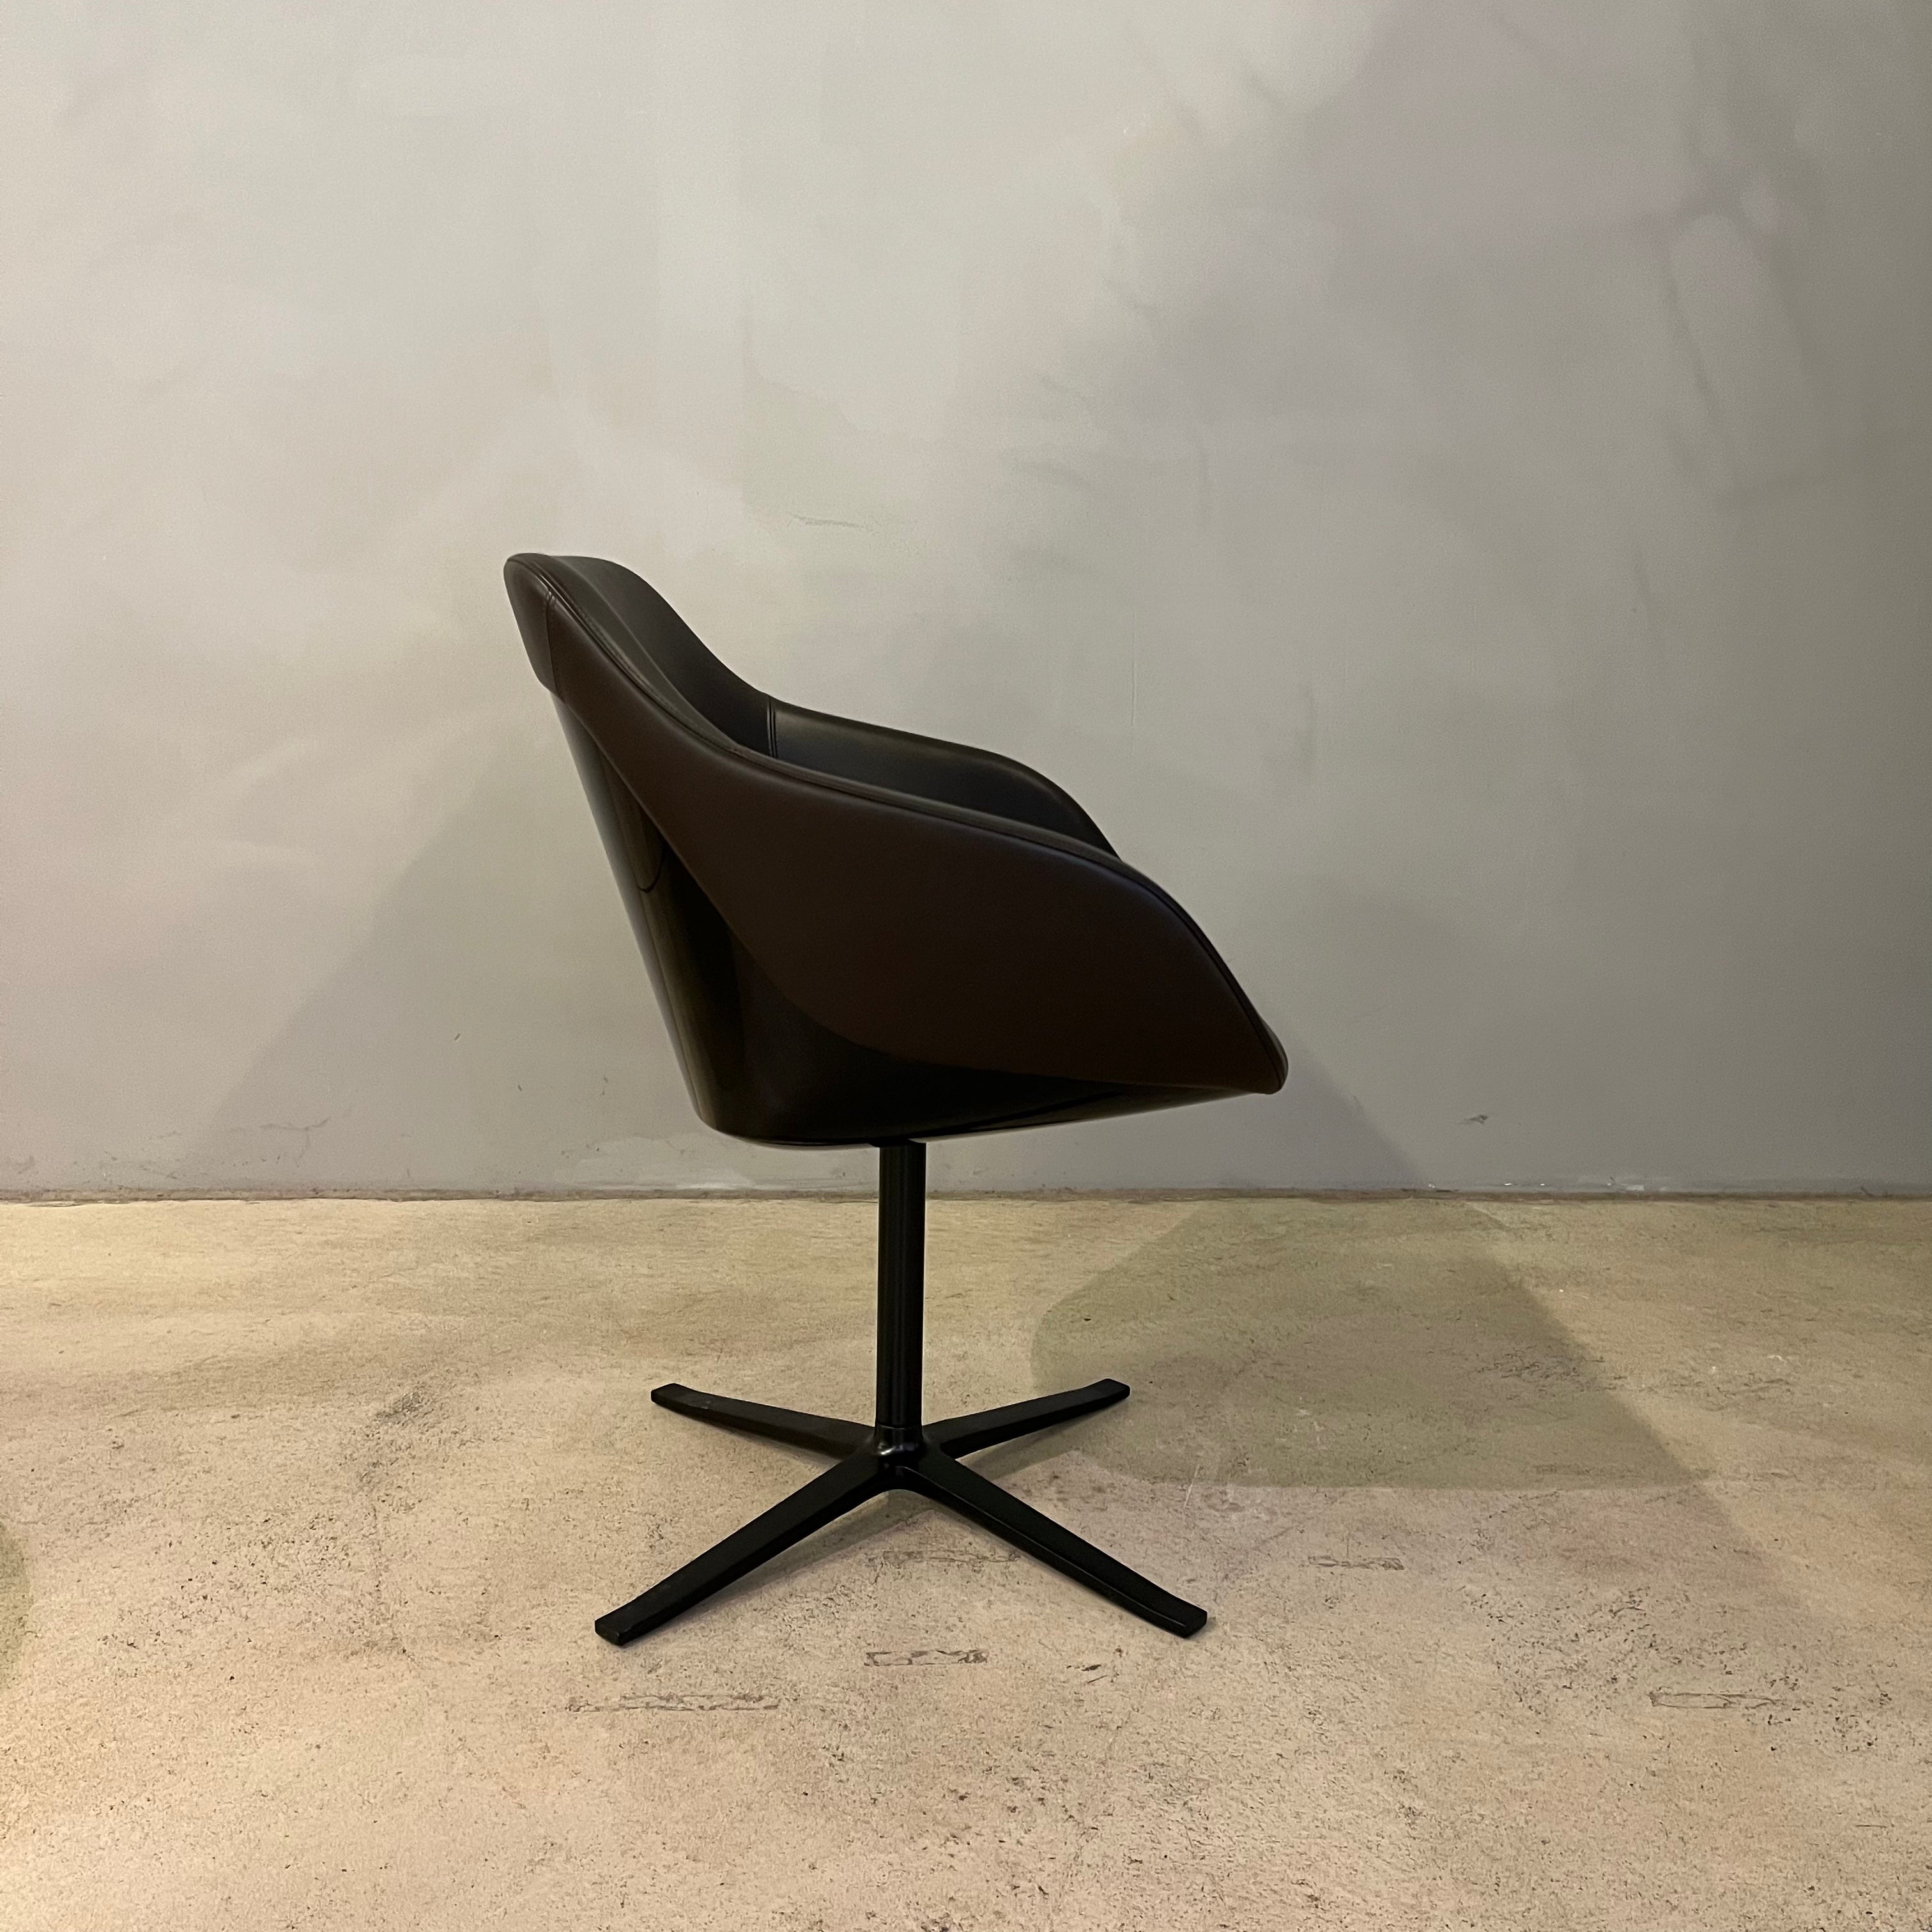 Walter Knoll / Turtle 1861 / shell chair